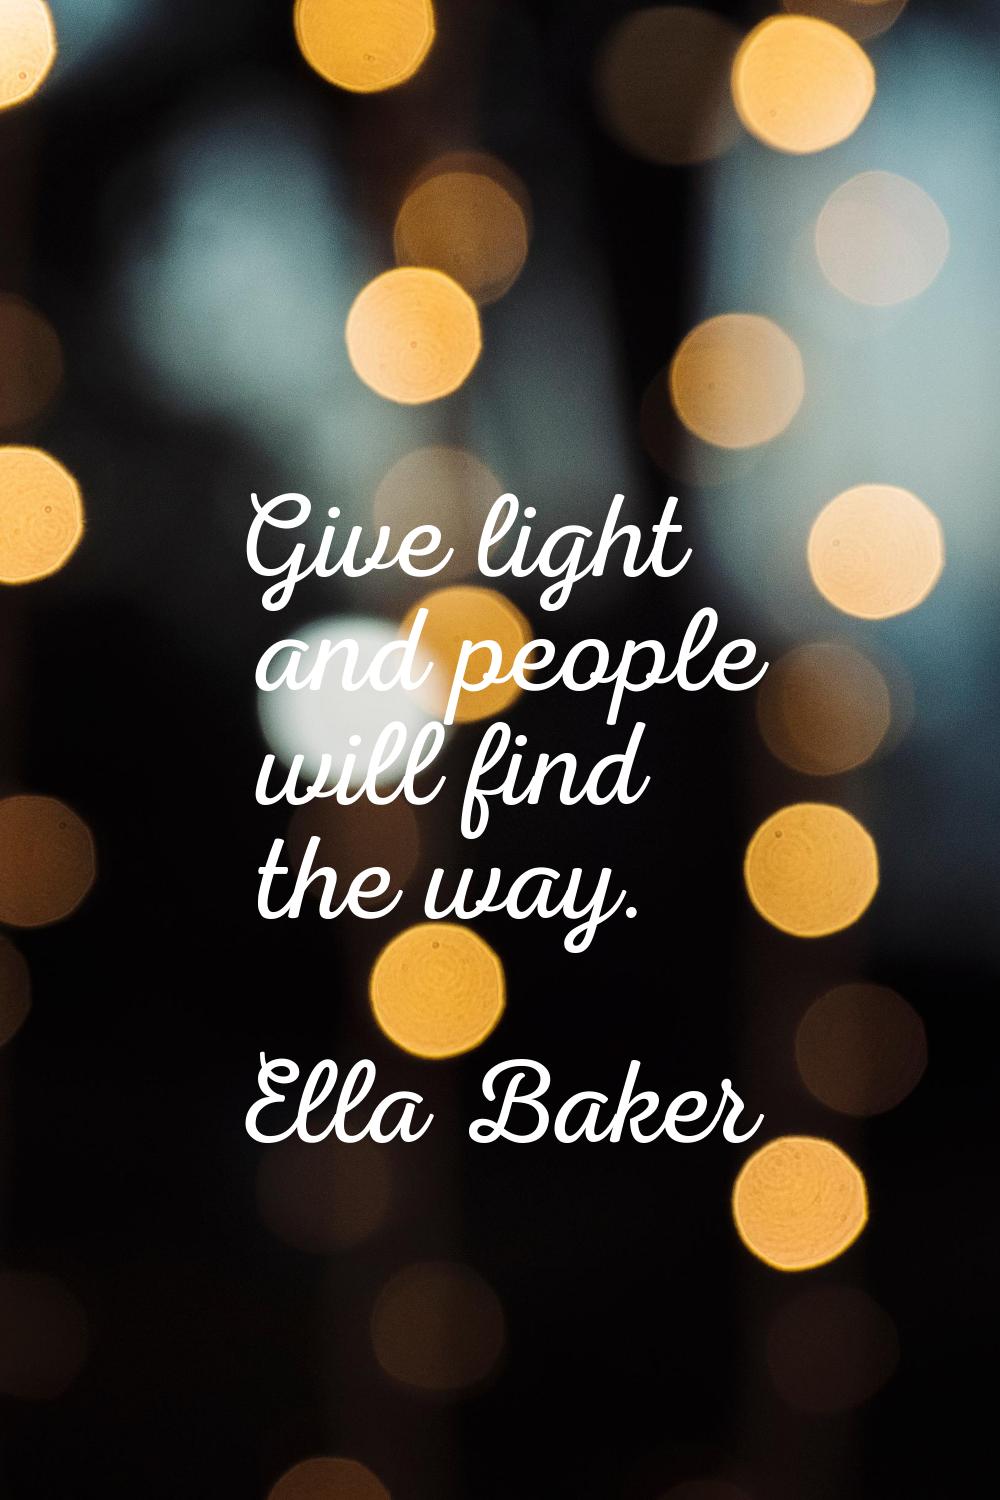 Give light and people will find the way.